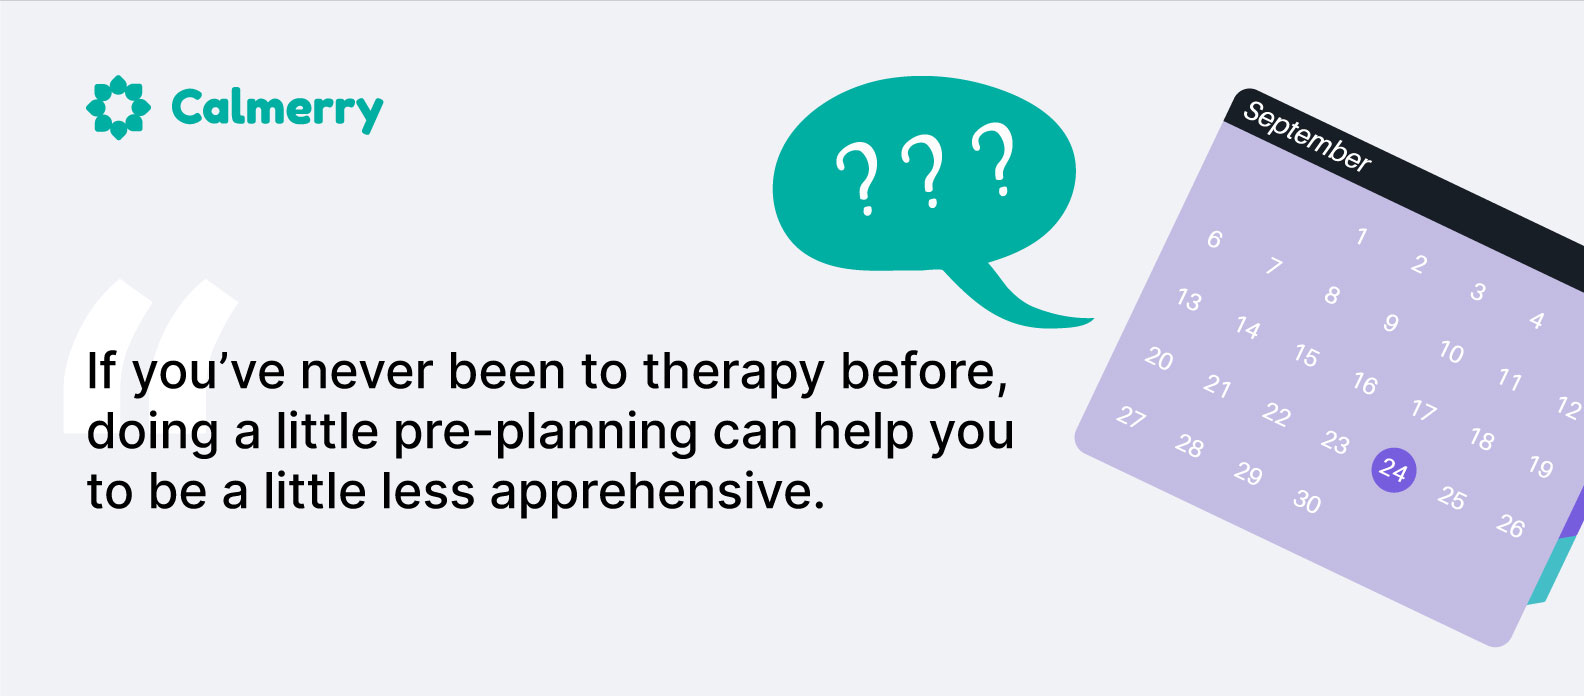 If you’ve never been to therapy before, doing a little pre-planning can help you to be a little less apprehensive